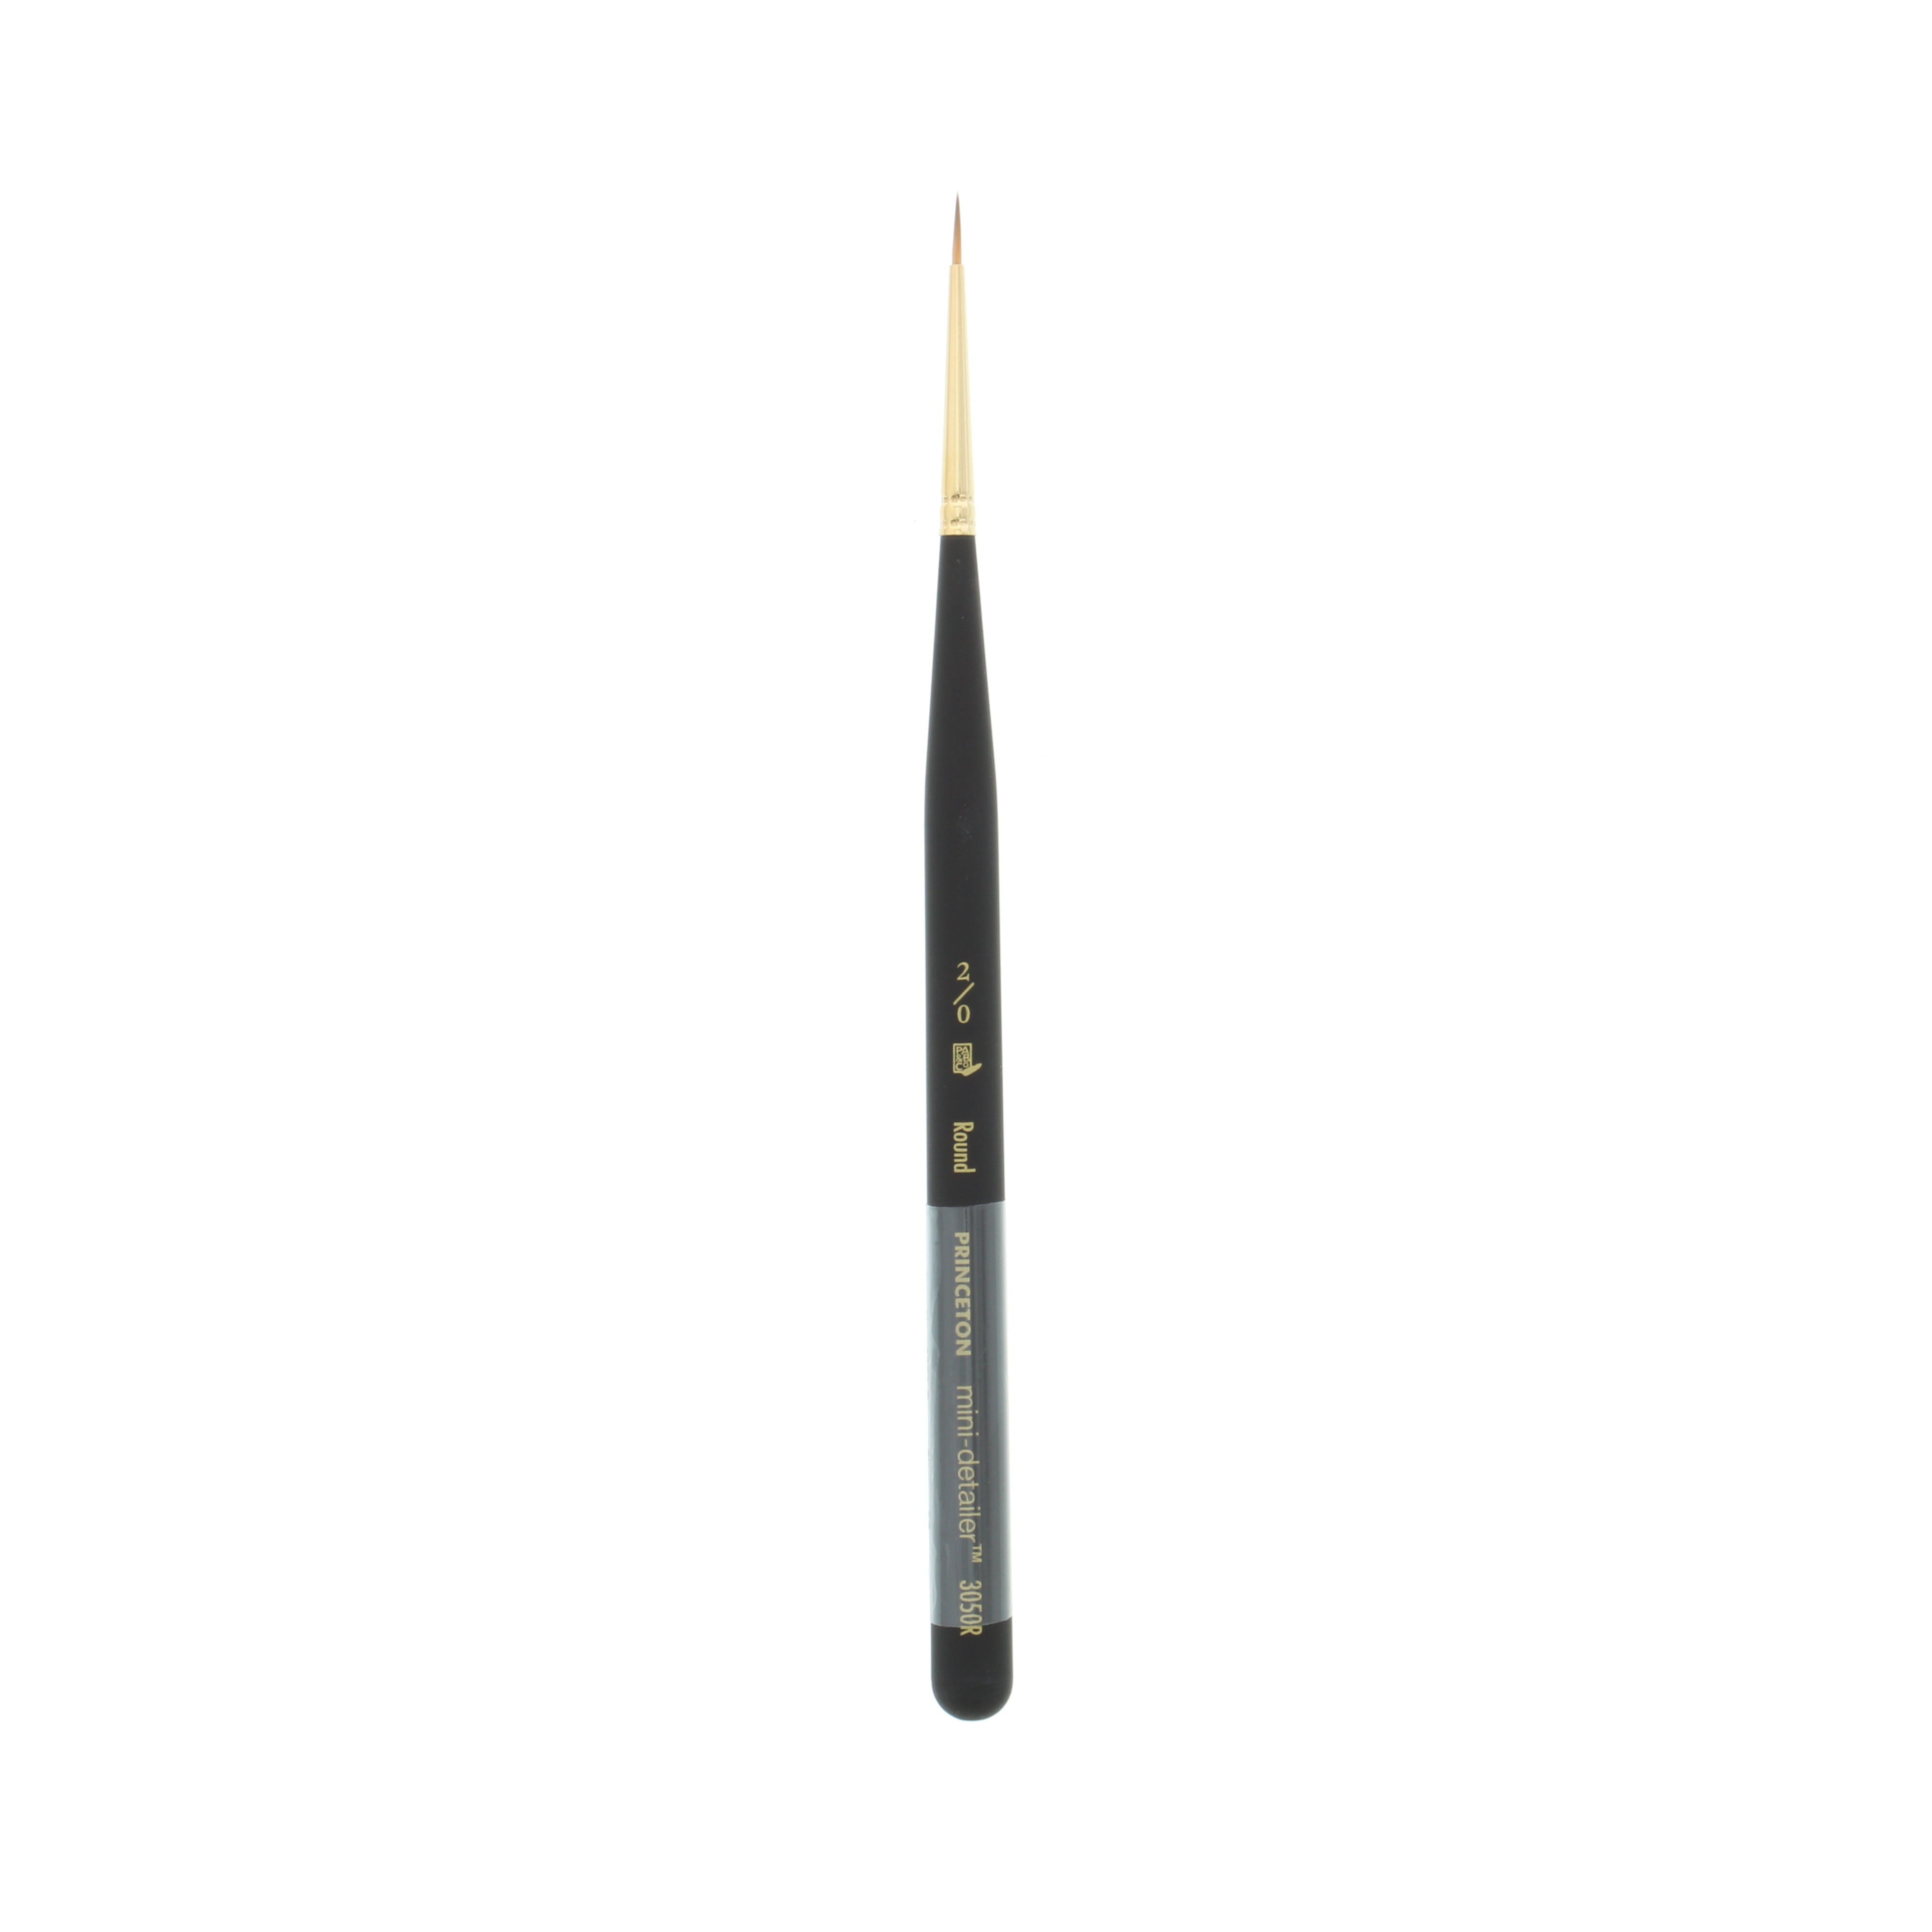 The Army Painter Hobby: 3pcs Super Detail - Fine Detail Paint Brush Set with Synthetic Taklon Hair - Small Paint Brush, Model Paint Brush, Fine Tip